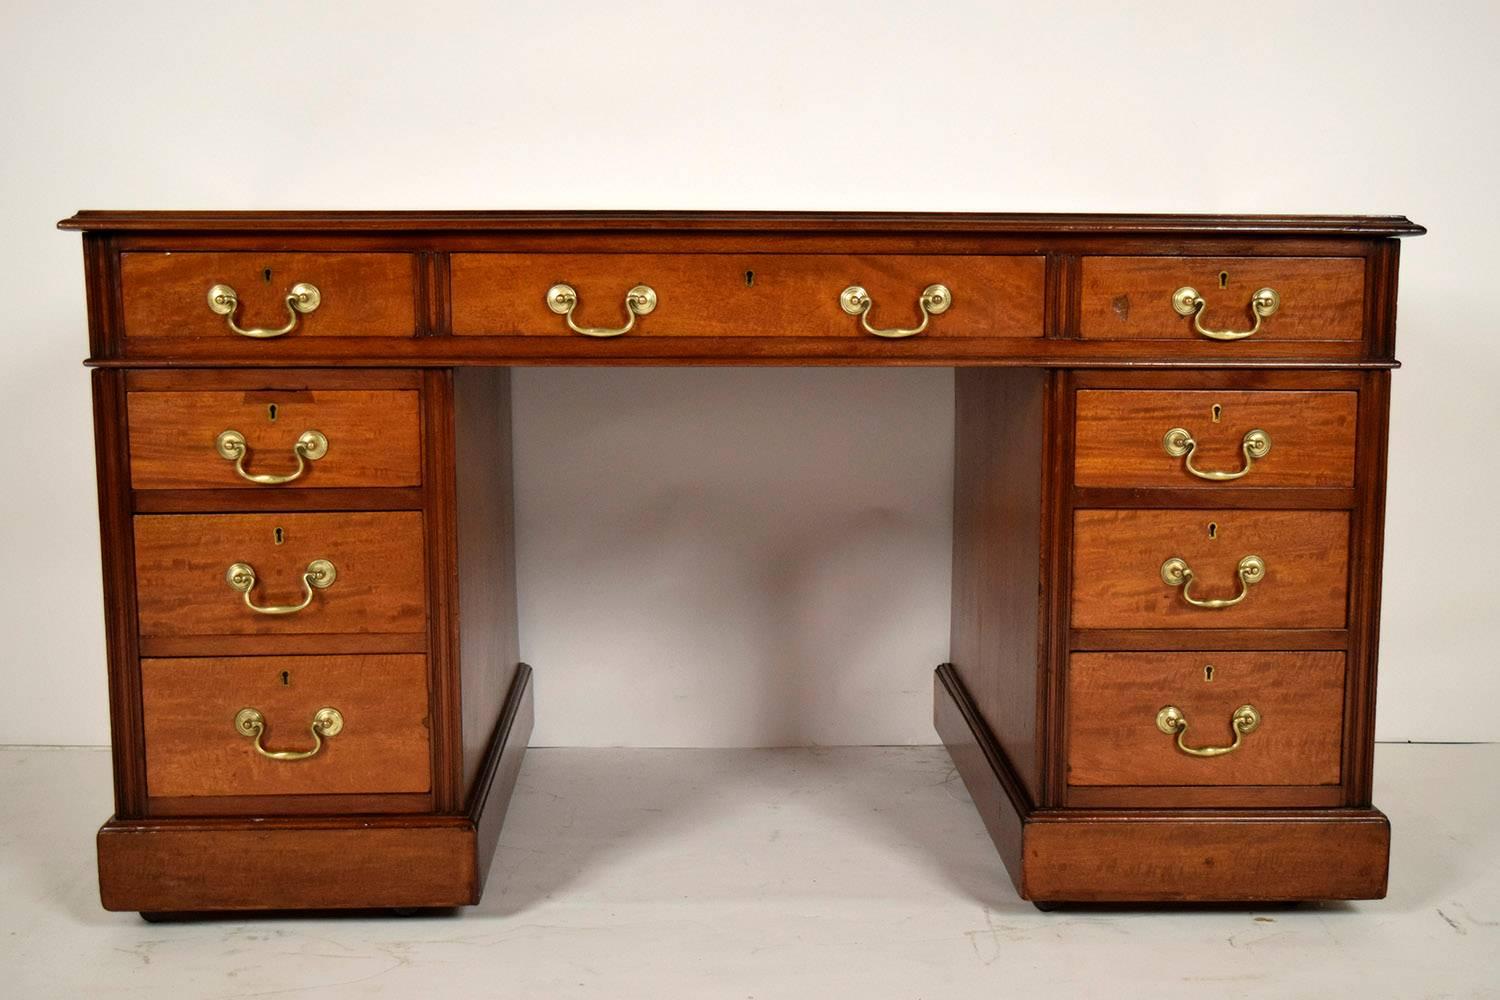 Elegant English pedestal desk. Original brown embossed leather top, solid wood finished in a mahogany color. Features one large center drawer with dual brass handles, each side has four drawers with single brass handles. Key and locks are in great